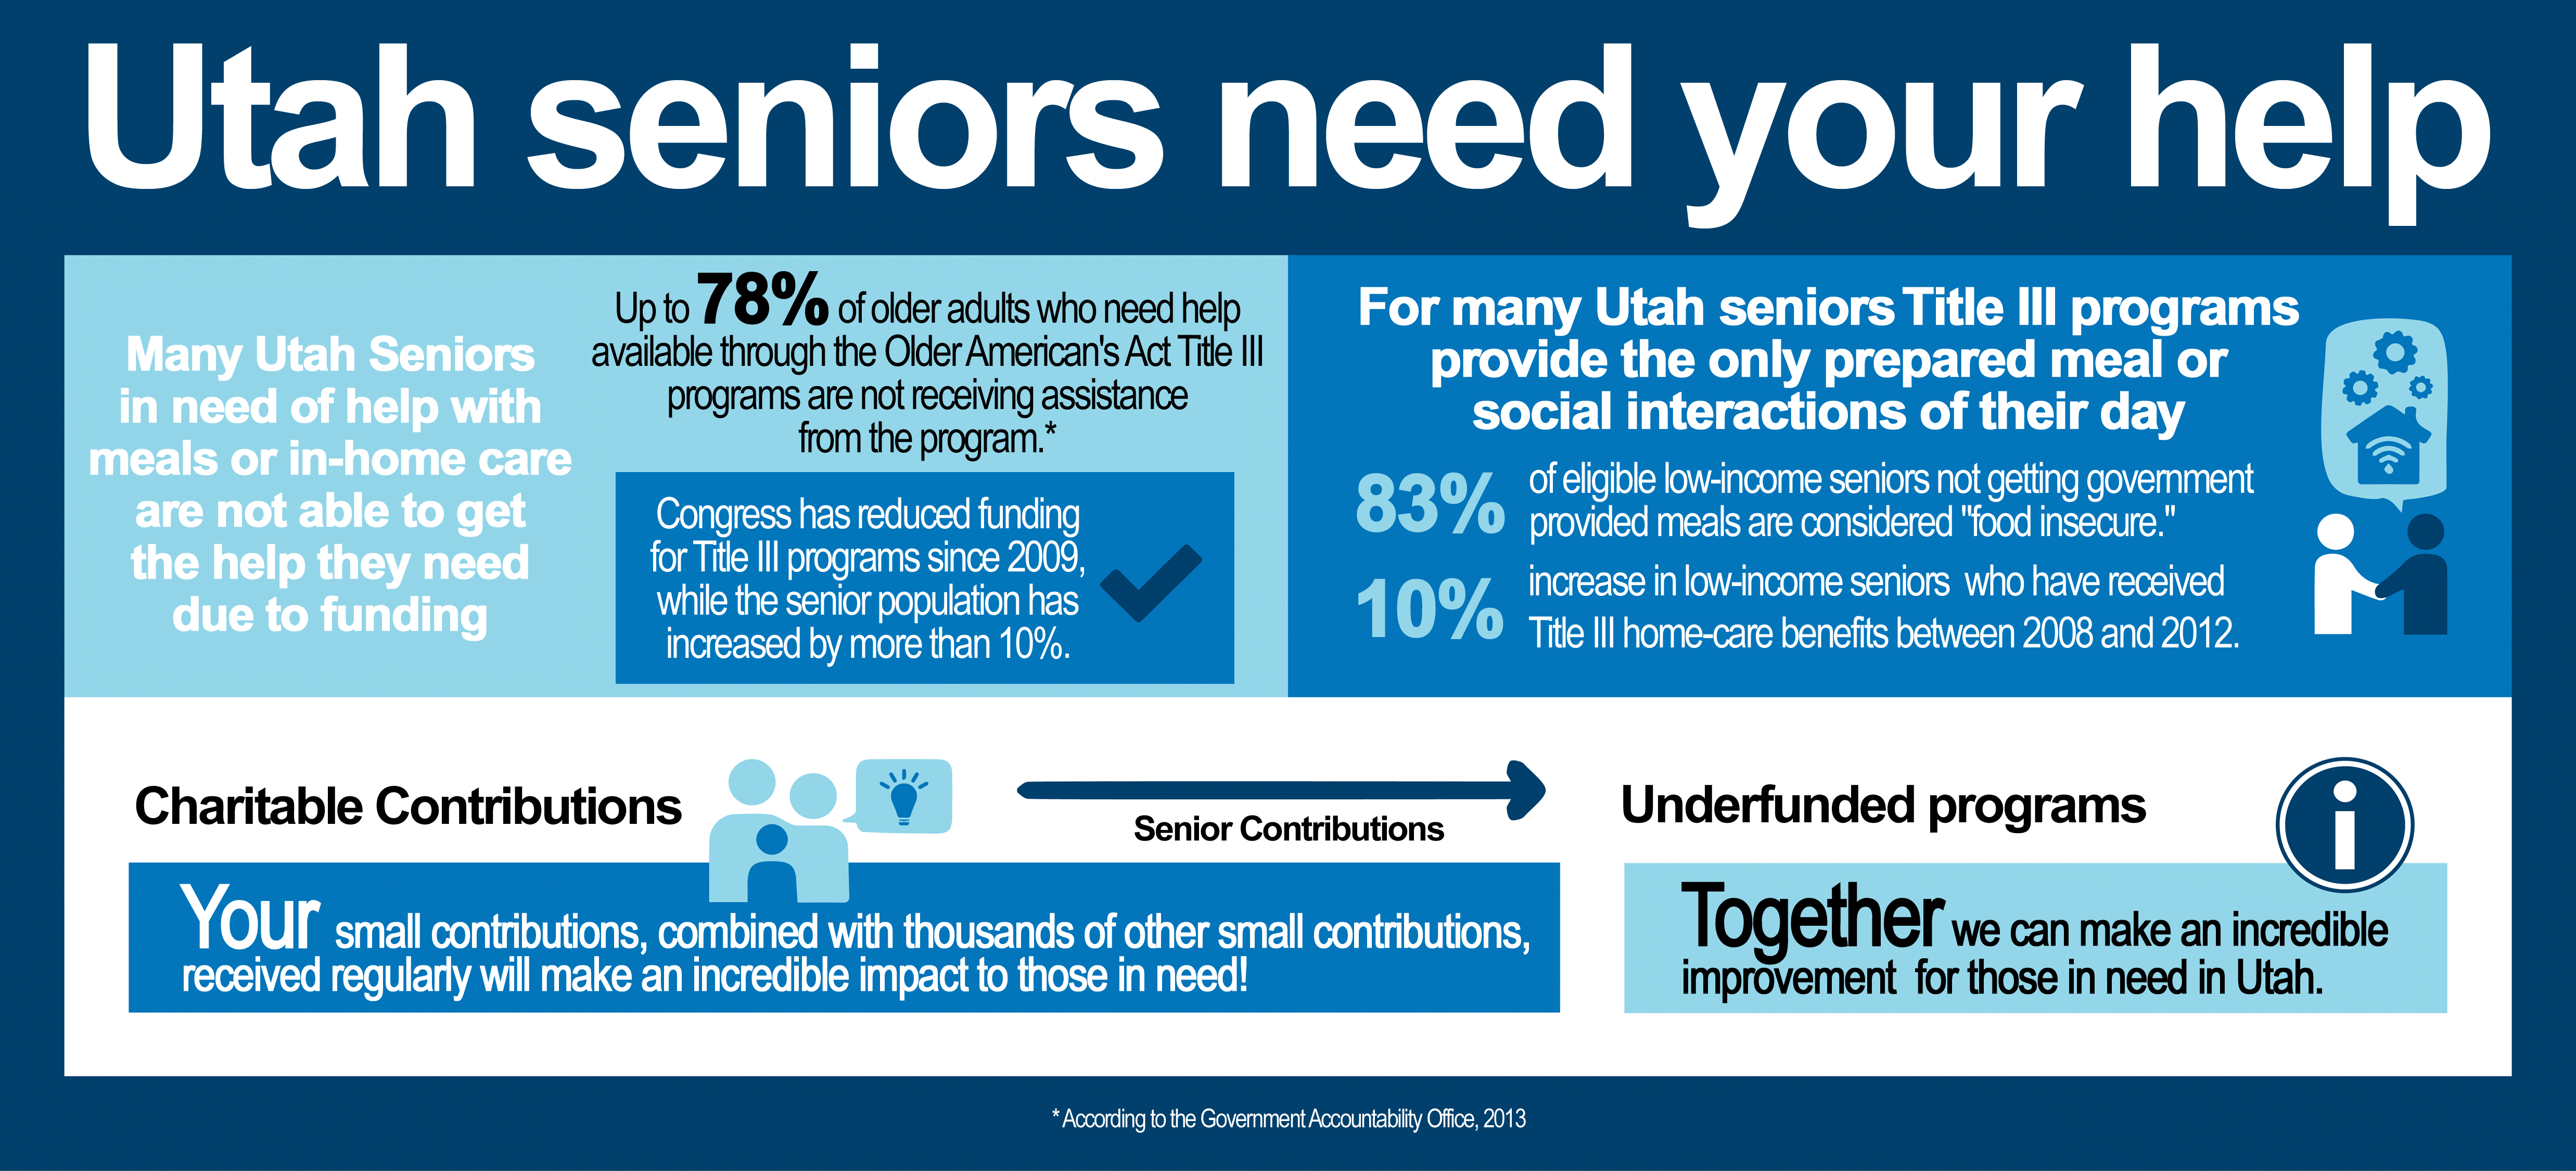 Where can low income seniors get assistance?